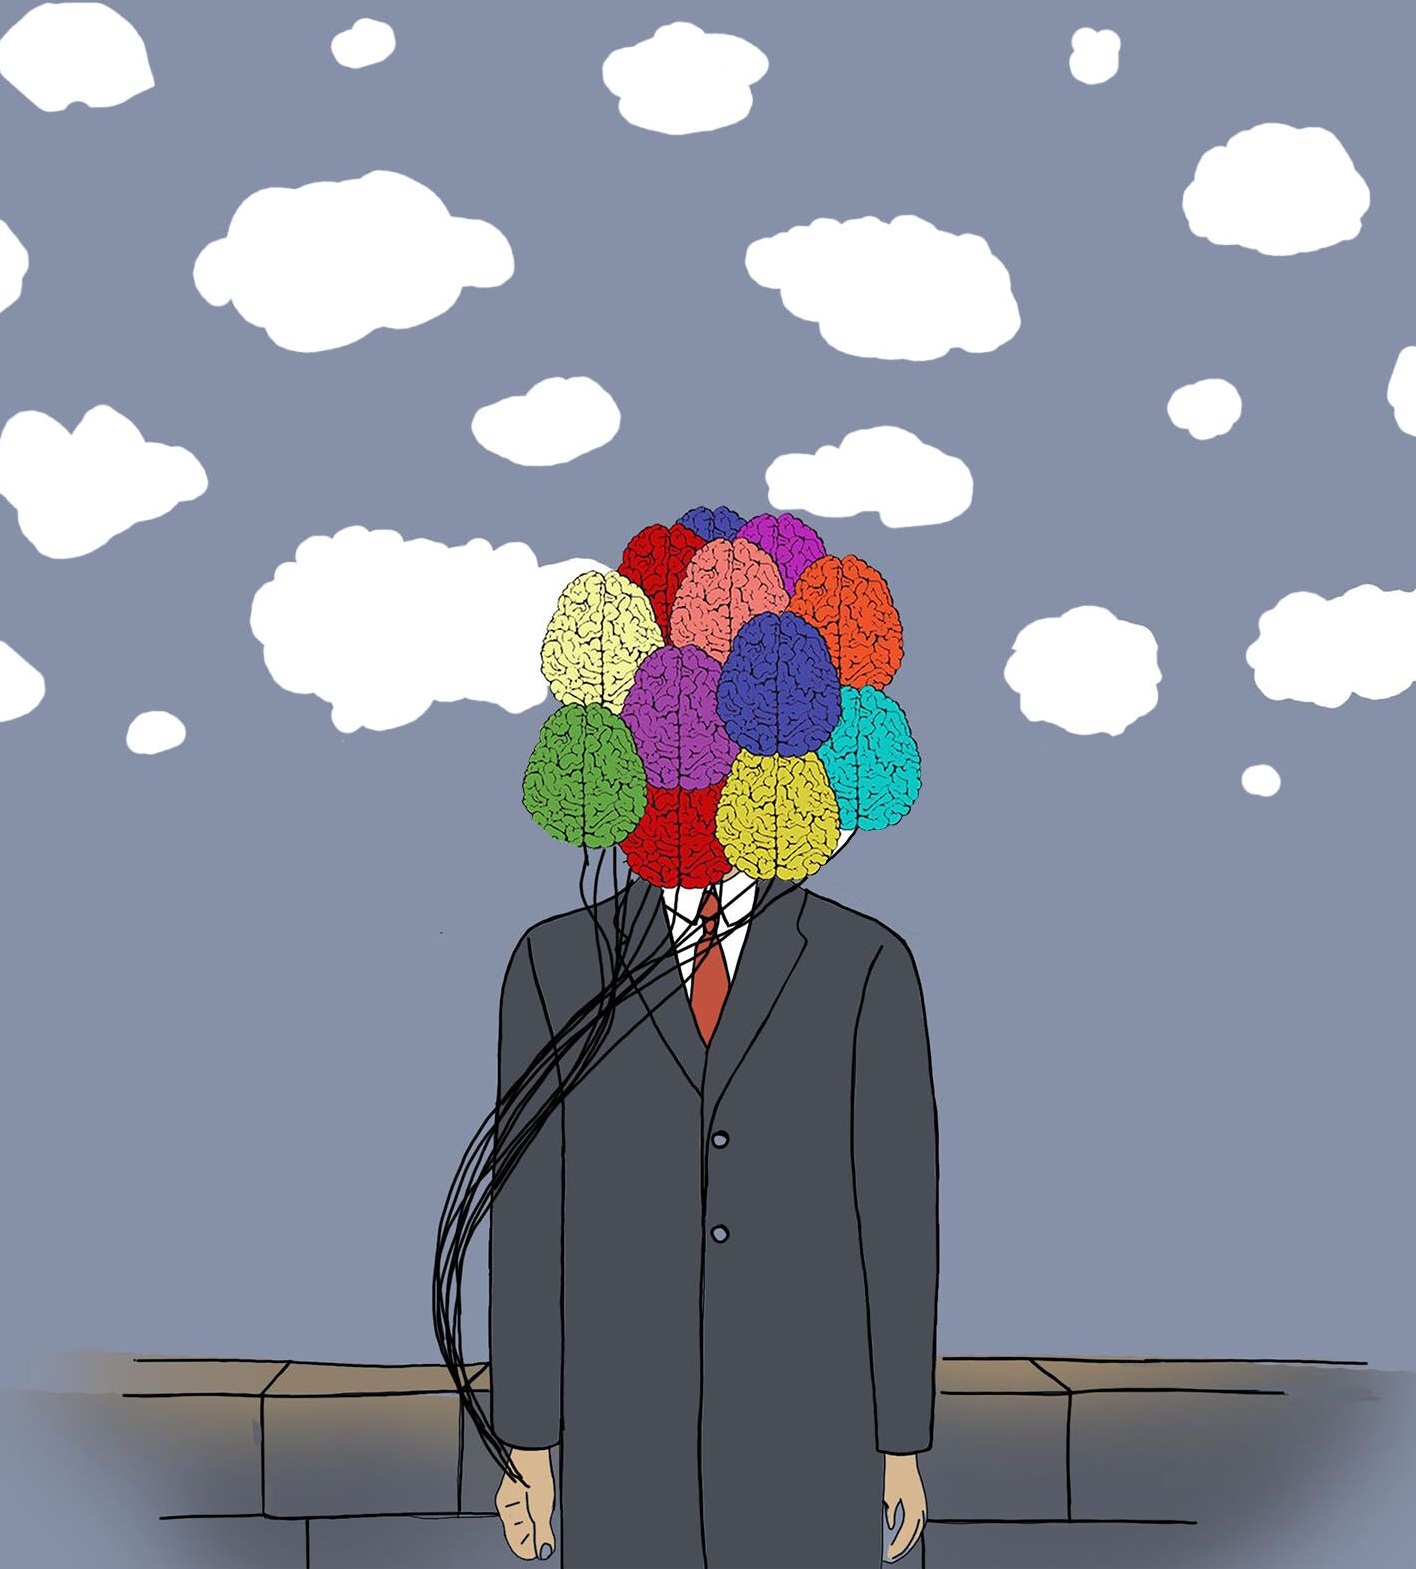 Magritte-style illustration of a man holding balloons shaped like brain in front of his face.